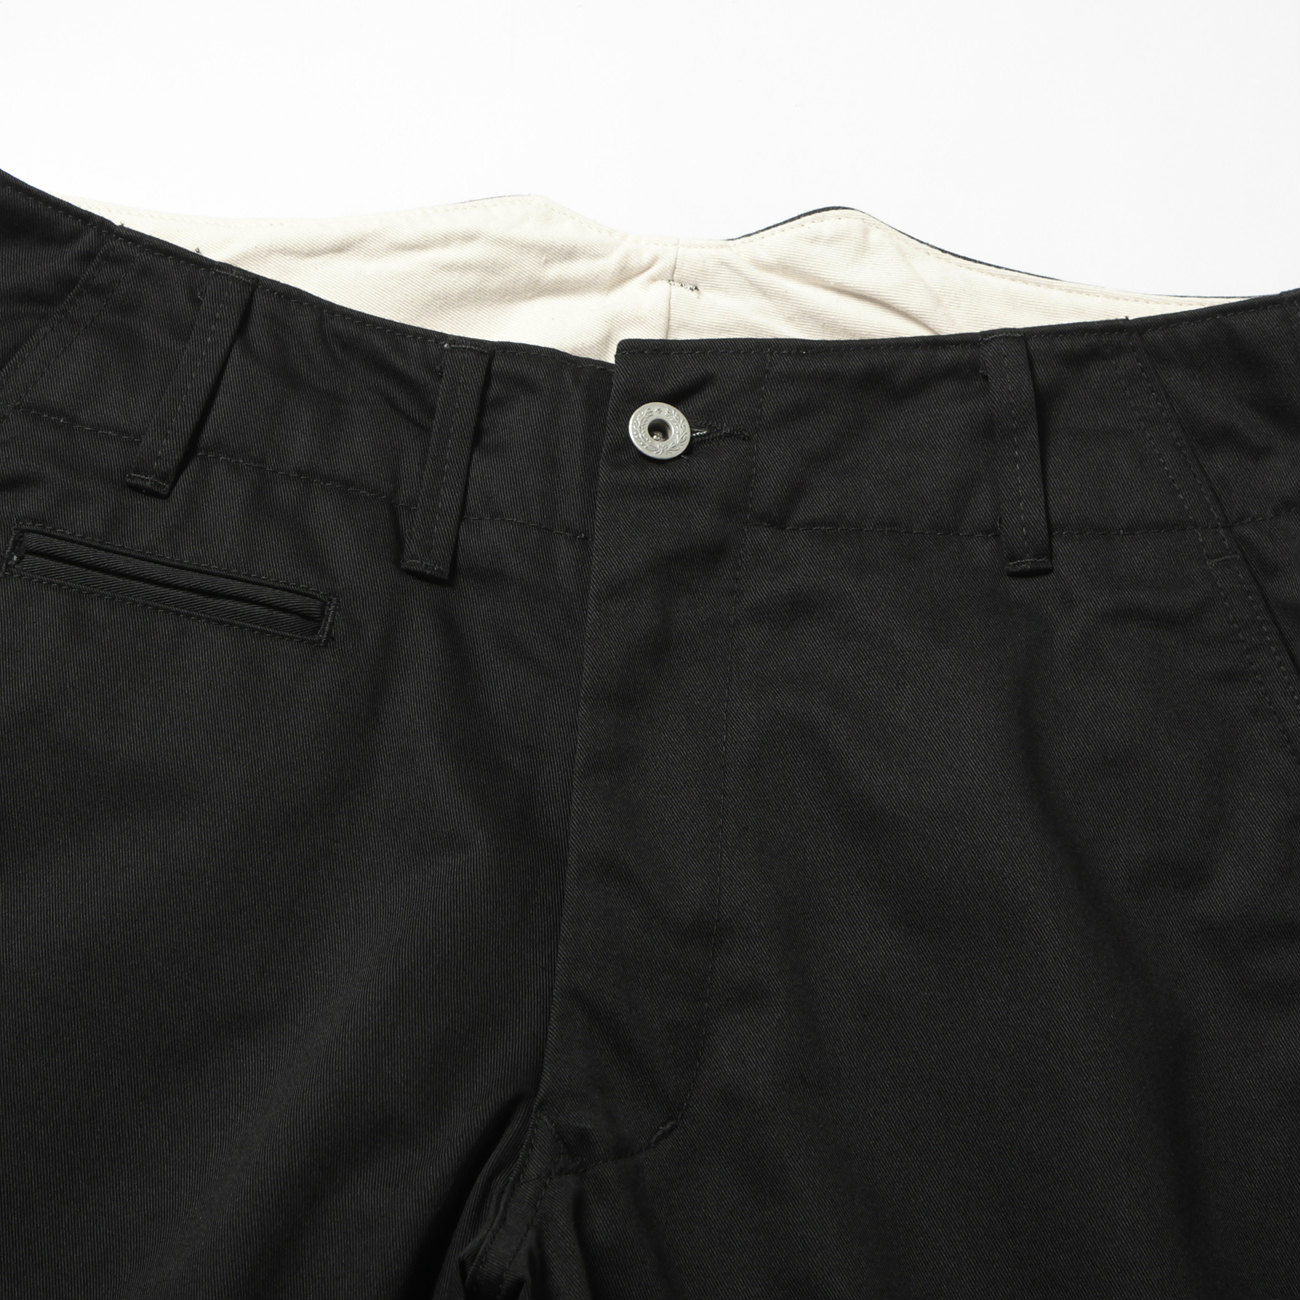 RESEARCH | Peg Top - Black | 通販 - 正規取扱店 | COLLECT STORE